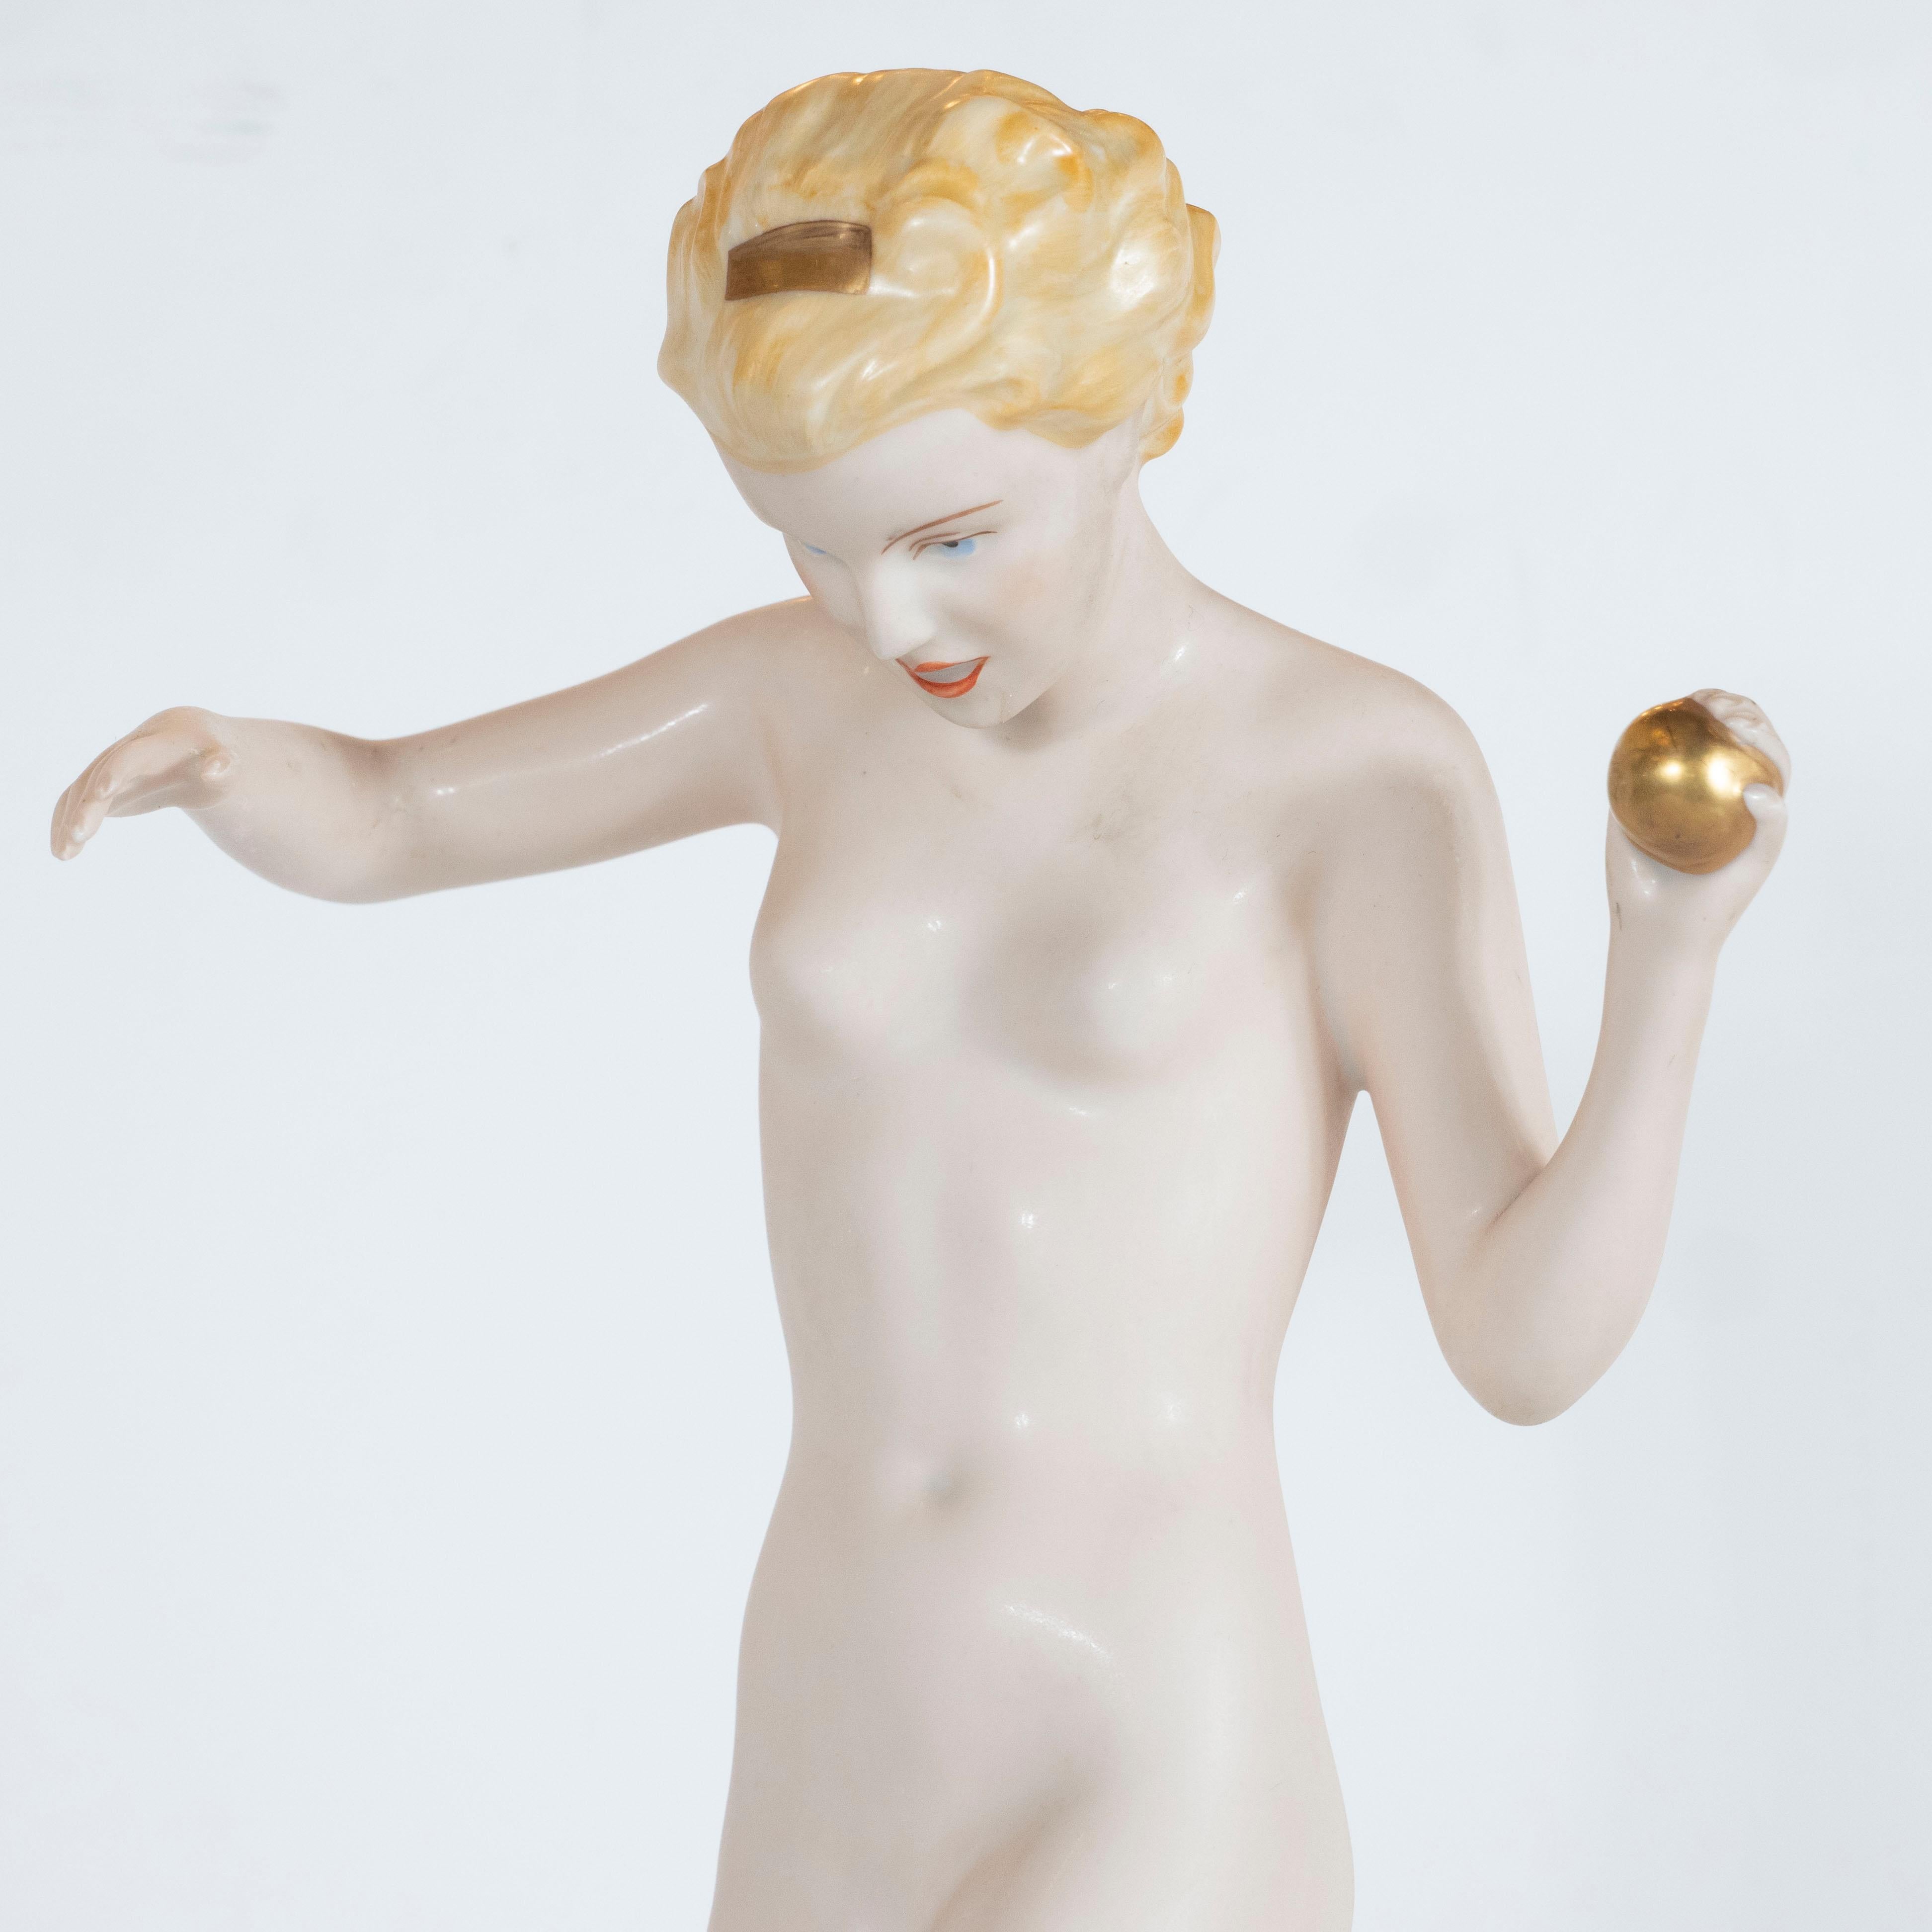 This elegant Art Deco sculpture was realized in the Czech Republic- renowned for producing some of the world's finest porcelain, sterling and glass products during this period- circa 1930. It features a hand painted nude lady with blonde hair